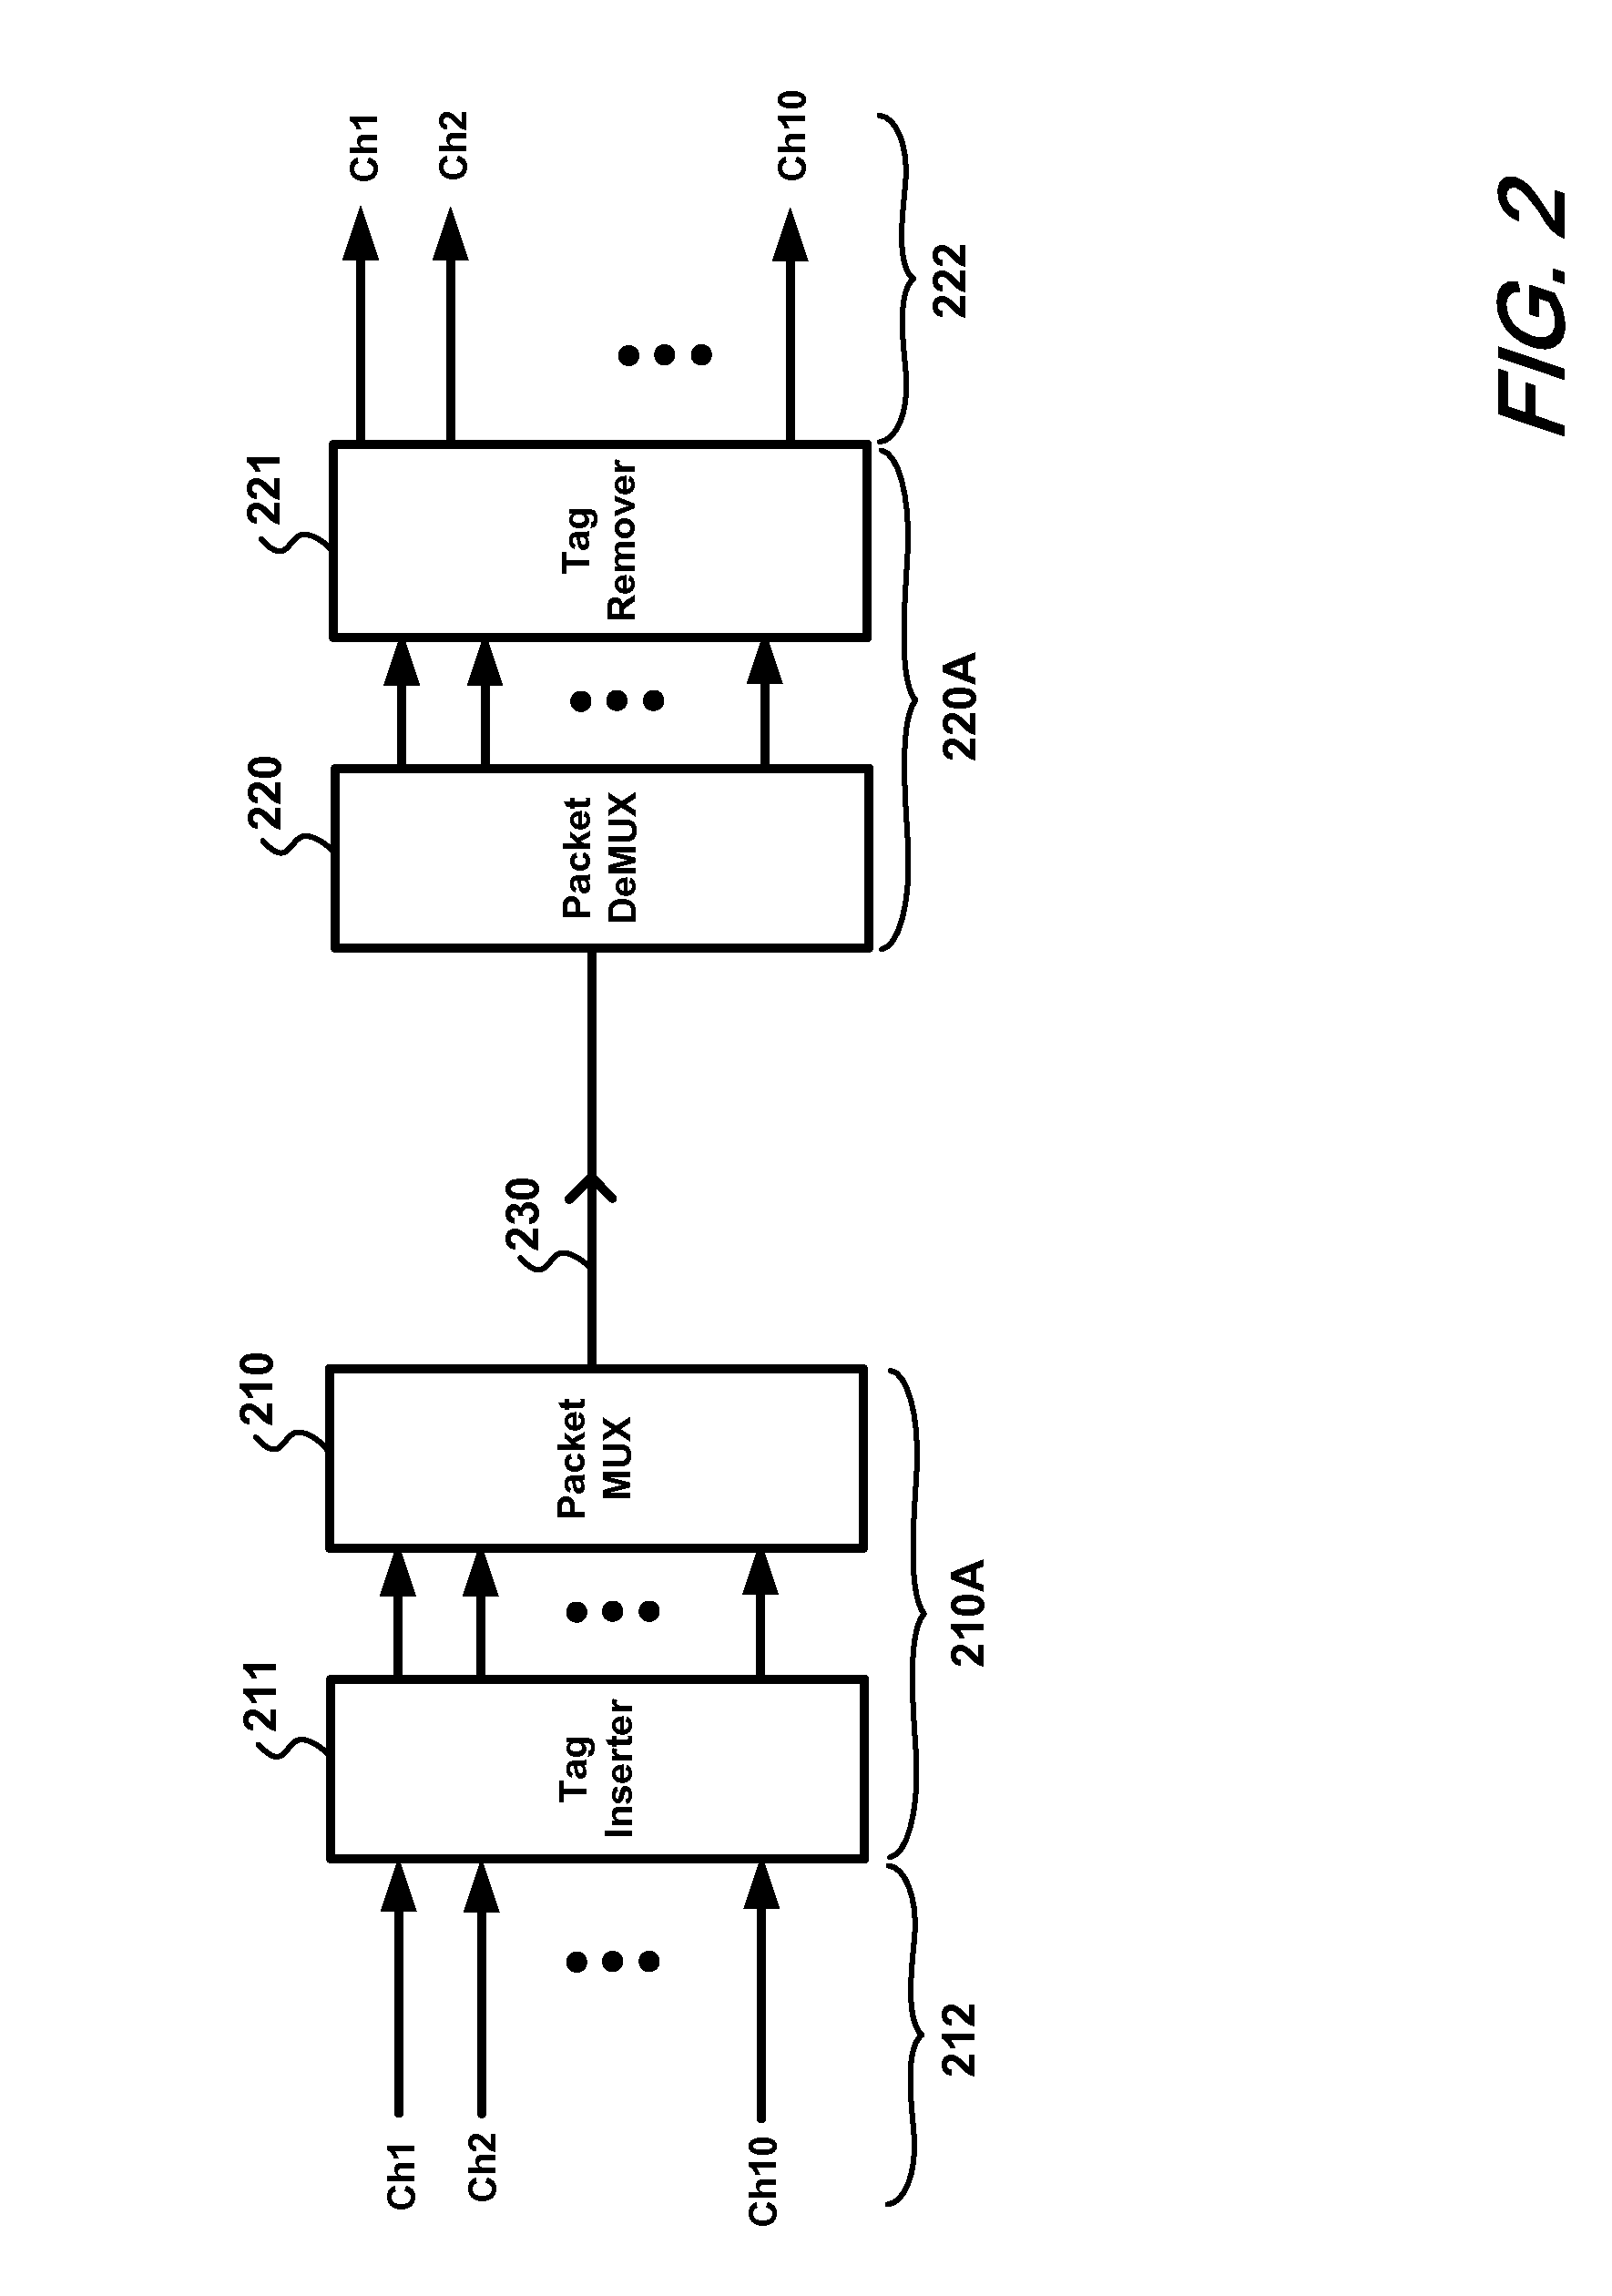 Packet transport arrangement for the transmission of multiplexed channelized packet signals